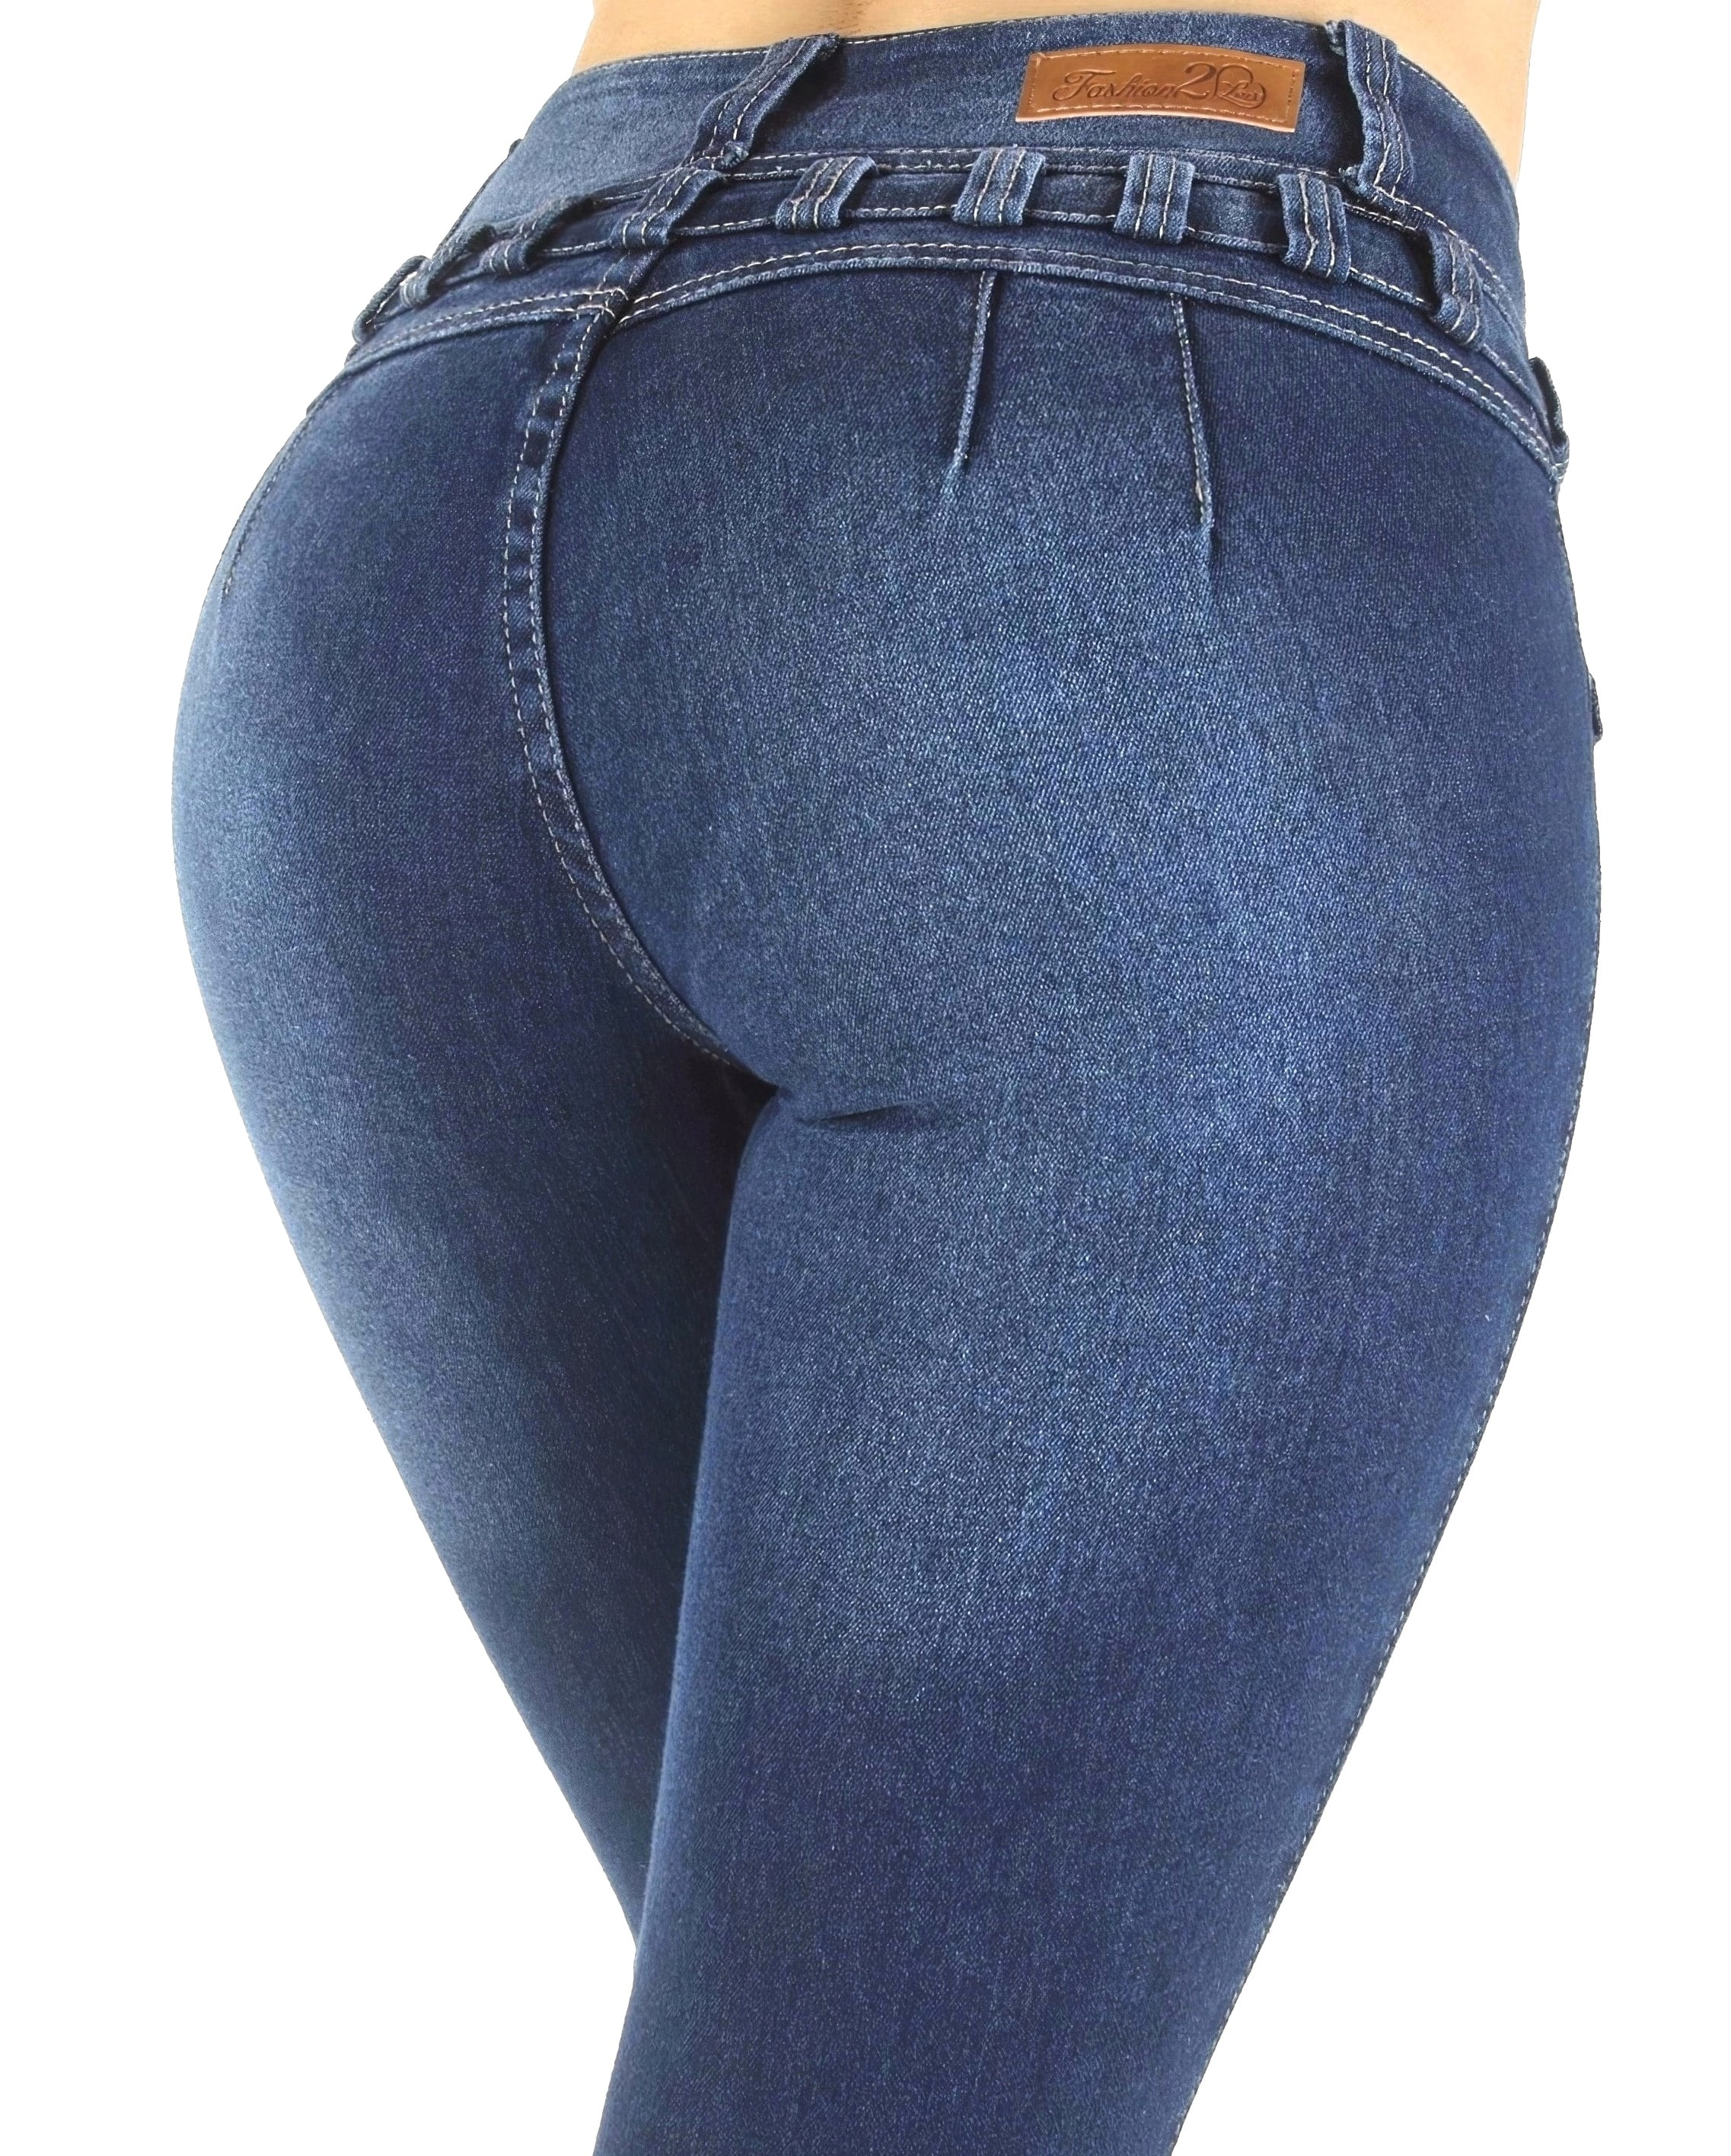 BLUE LA-263 High Waist  Stretch Push-Up Colombian Design Skinny Jeans in M 